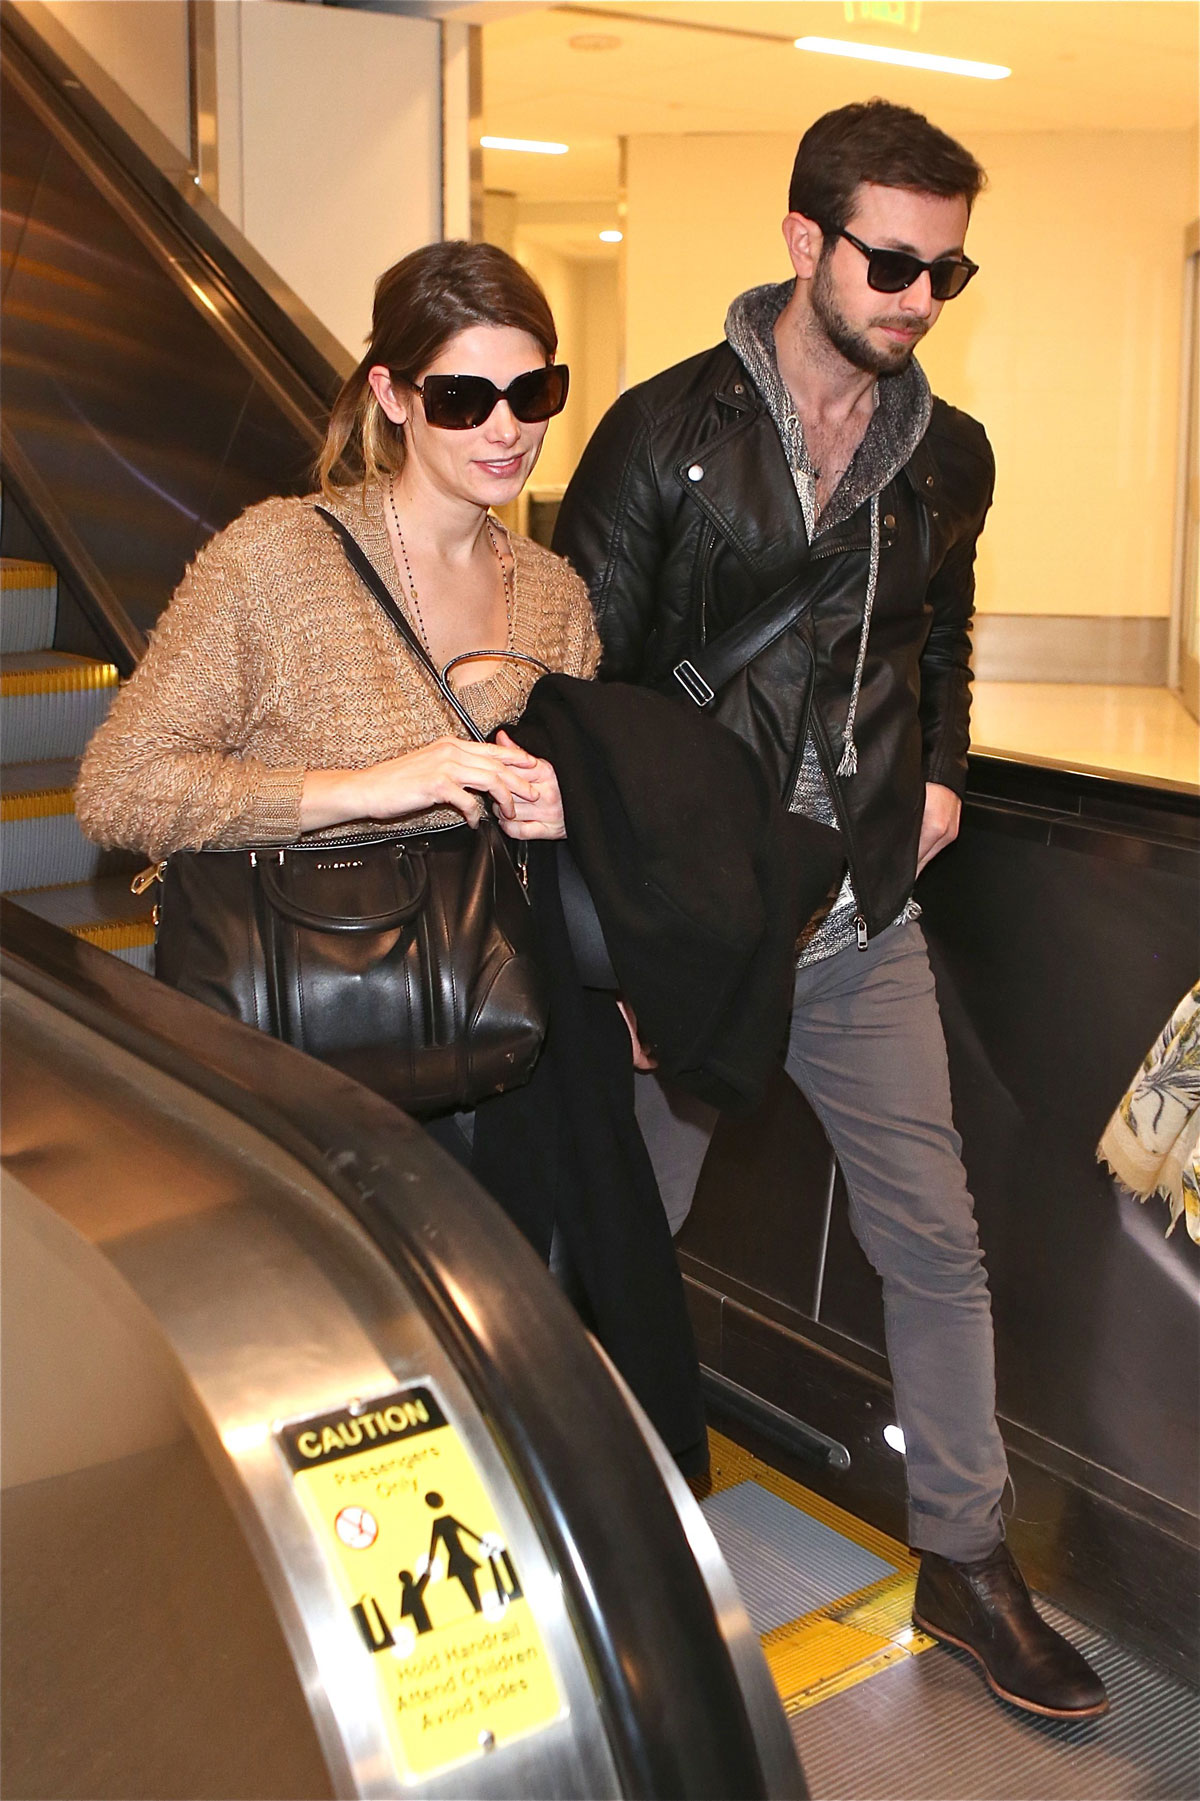 Ashley Greene at LAX Airport in Los Angeles